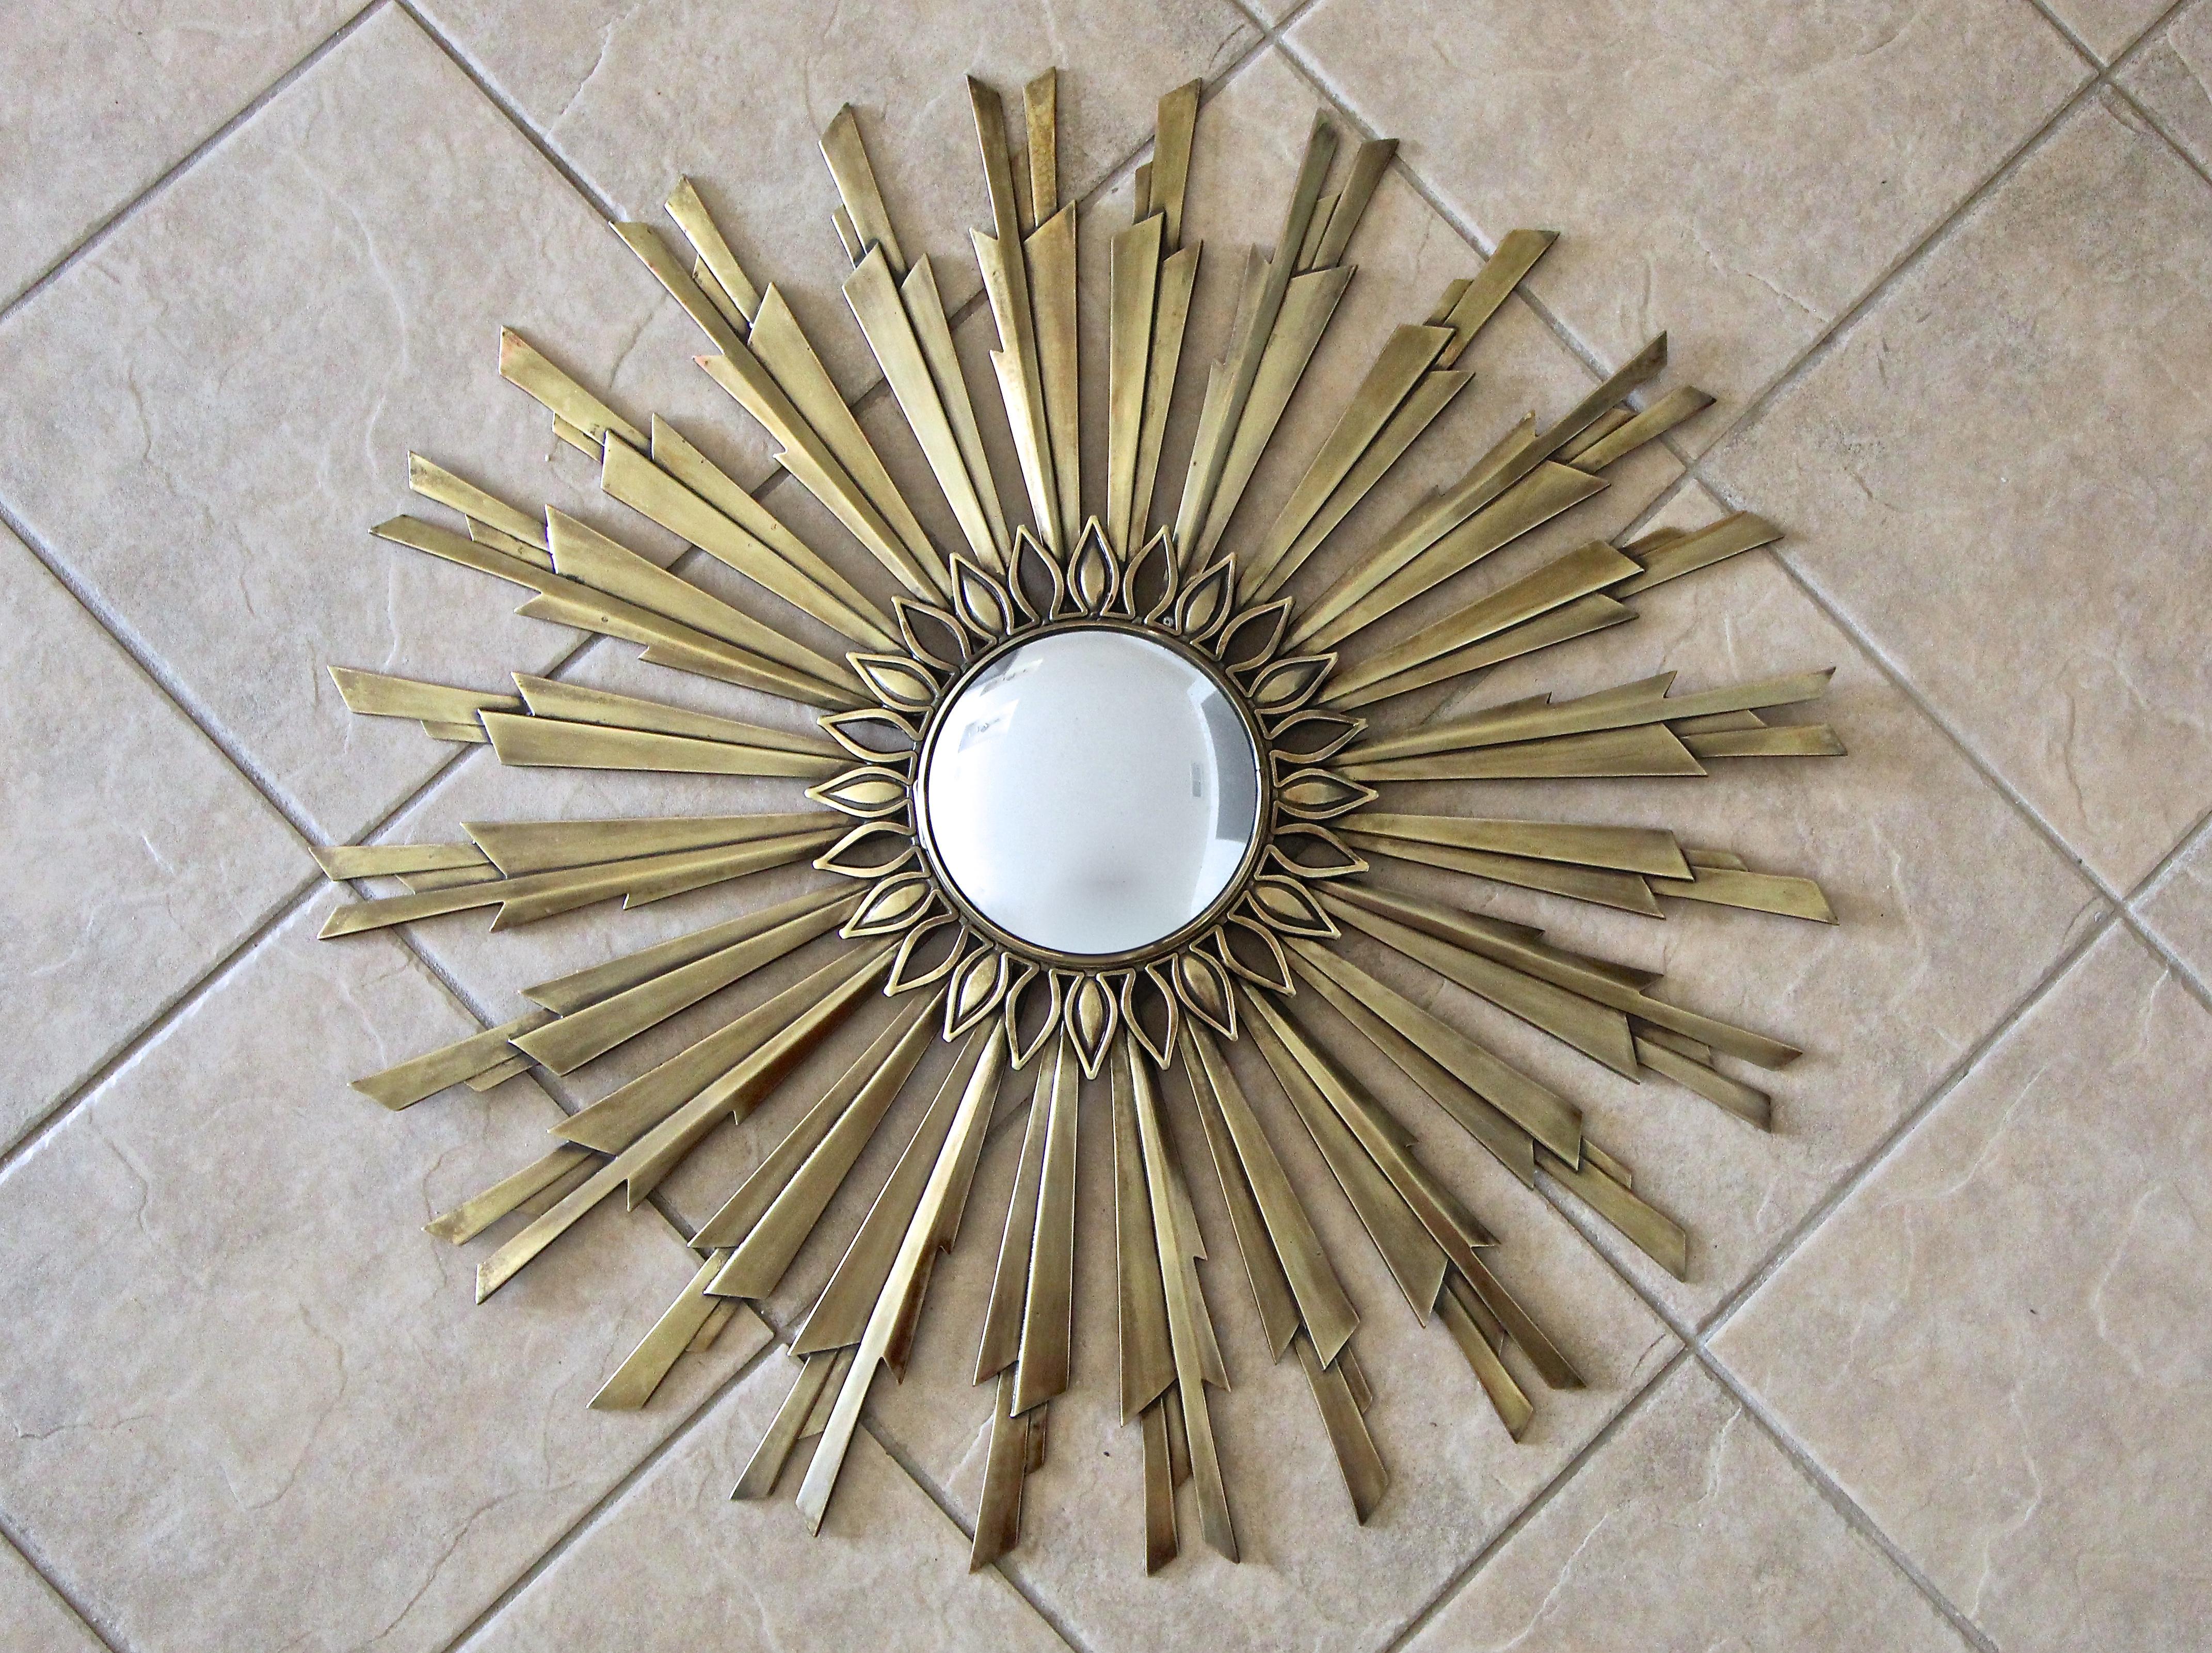 Art Deco sunburst or starburst bronze or brass wall mirror with thick angled 